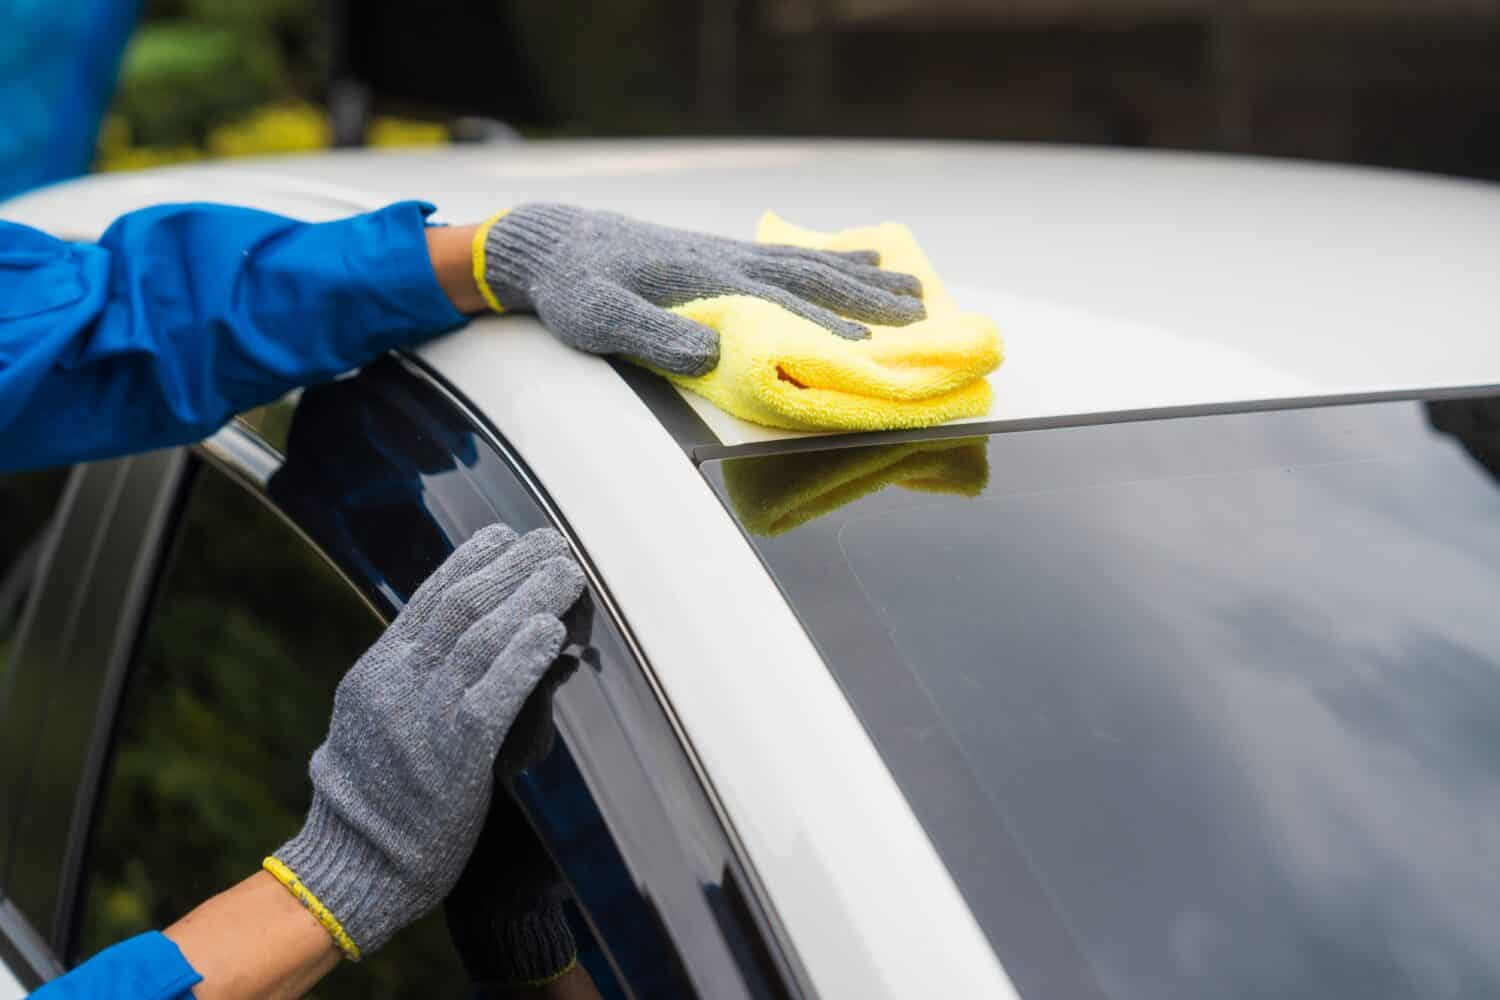 close-up shot of a hand wiping a car's windshield with yellow microfiber cloth, mechanic's hand polishing car hood with soft cloth